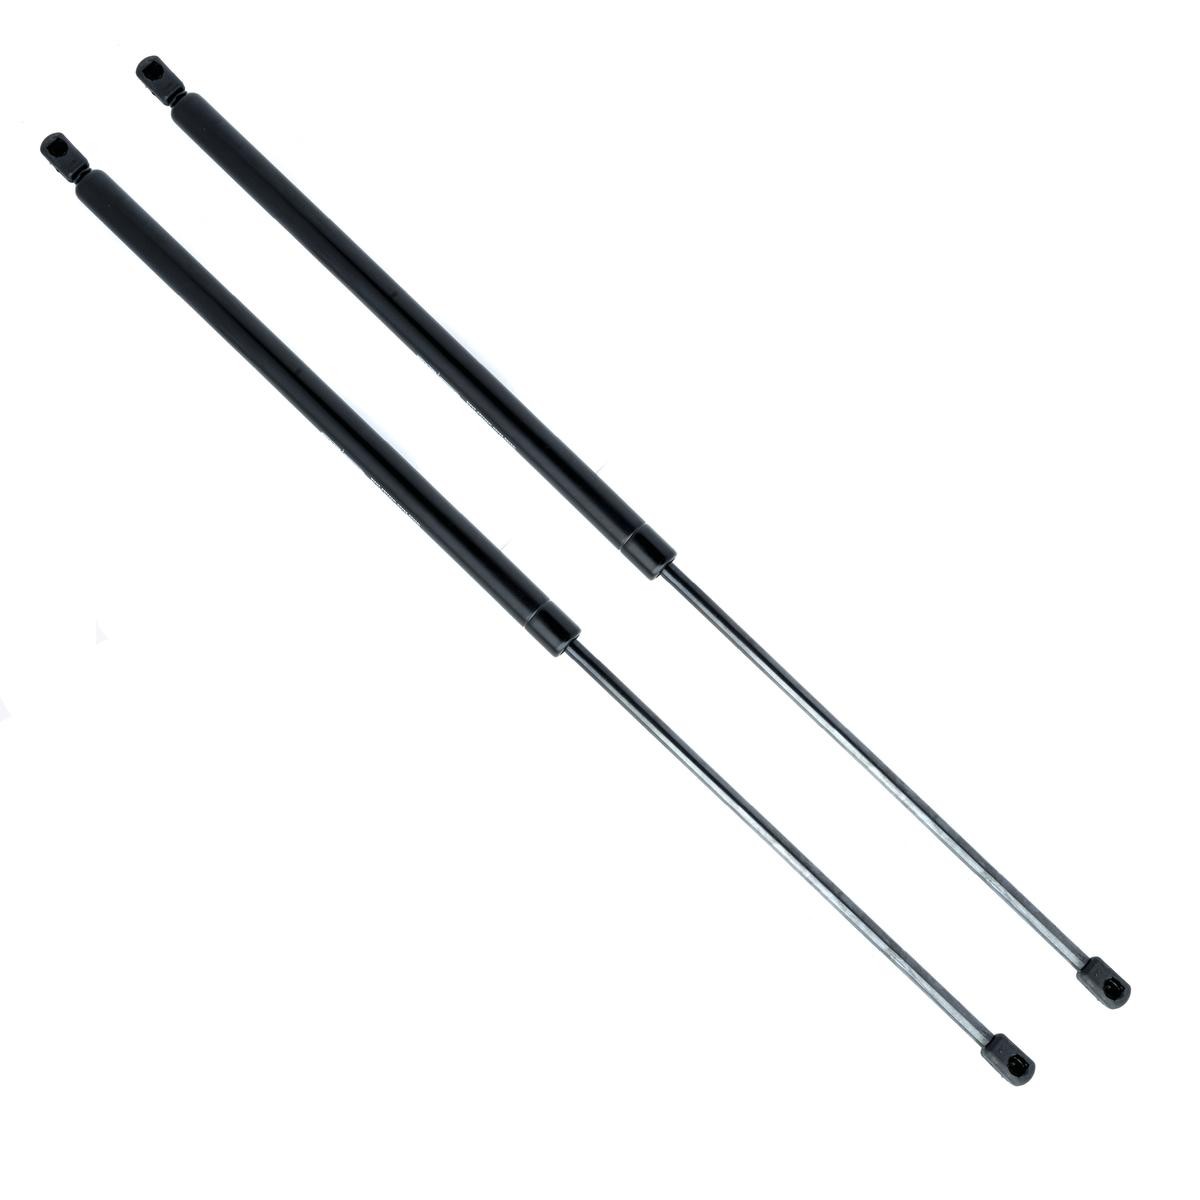 GS0775 EINPARTS 725N, 735 mm Stroke: 310mm Gas spring, boot- / cargo area EP9920GS buy